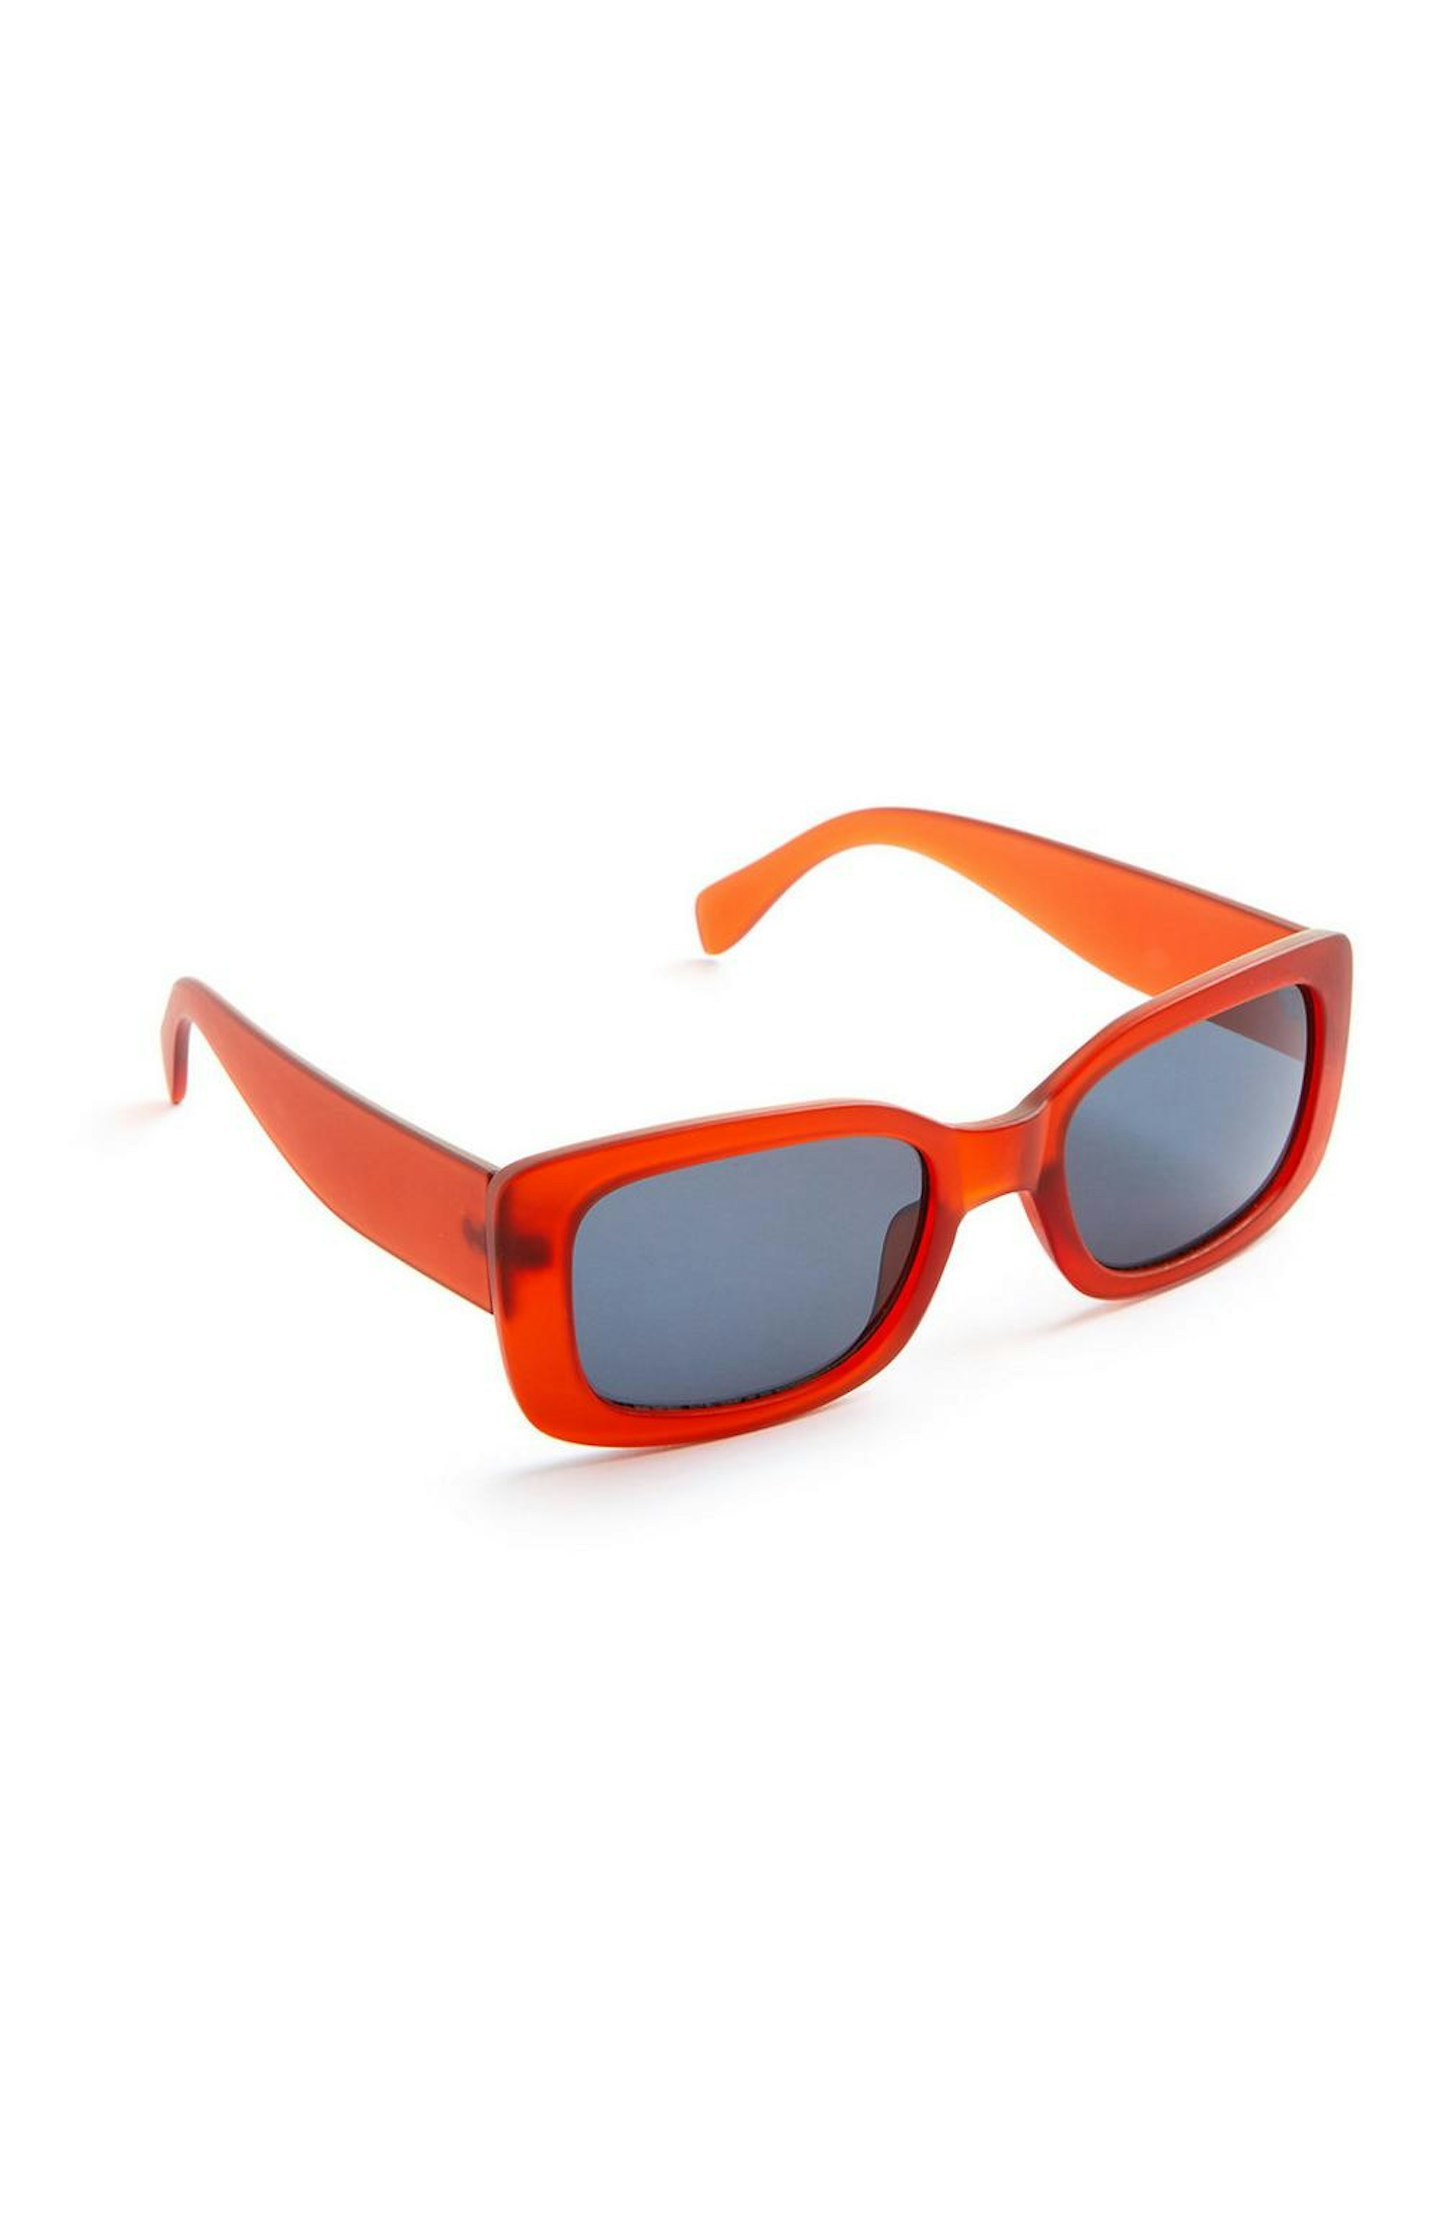 Primark, Red Frosted Rectangle Sunglasses, £2